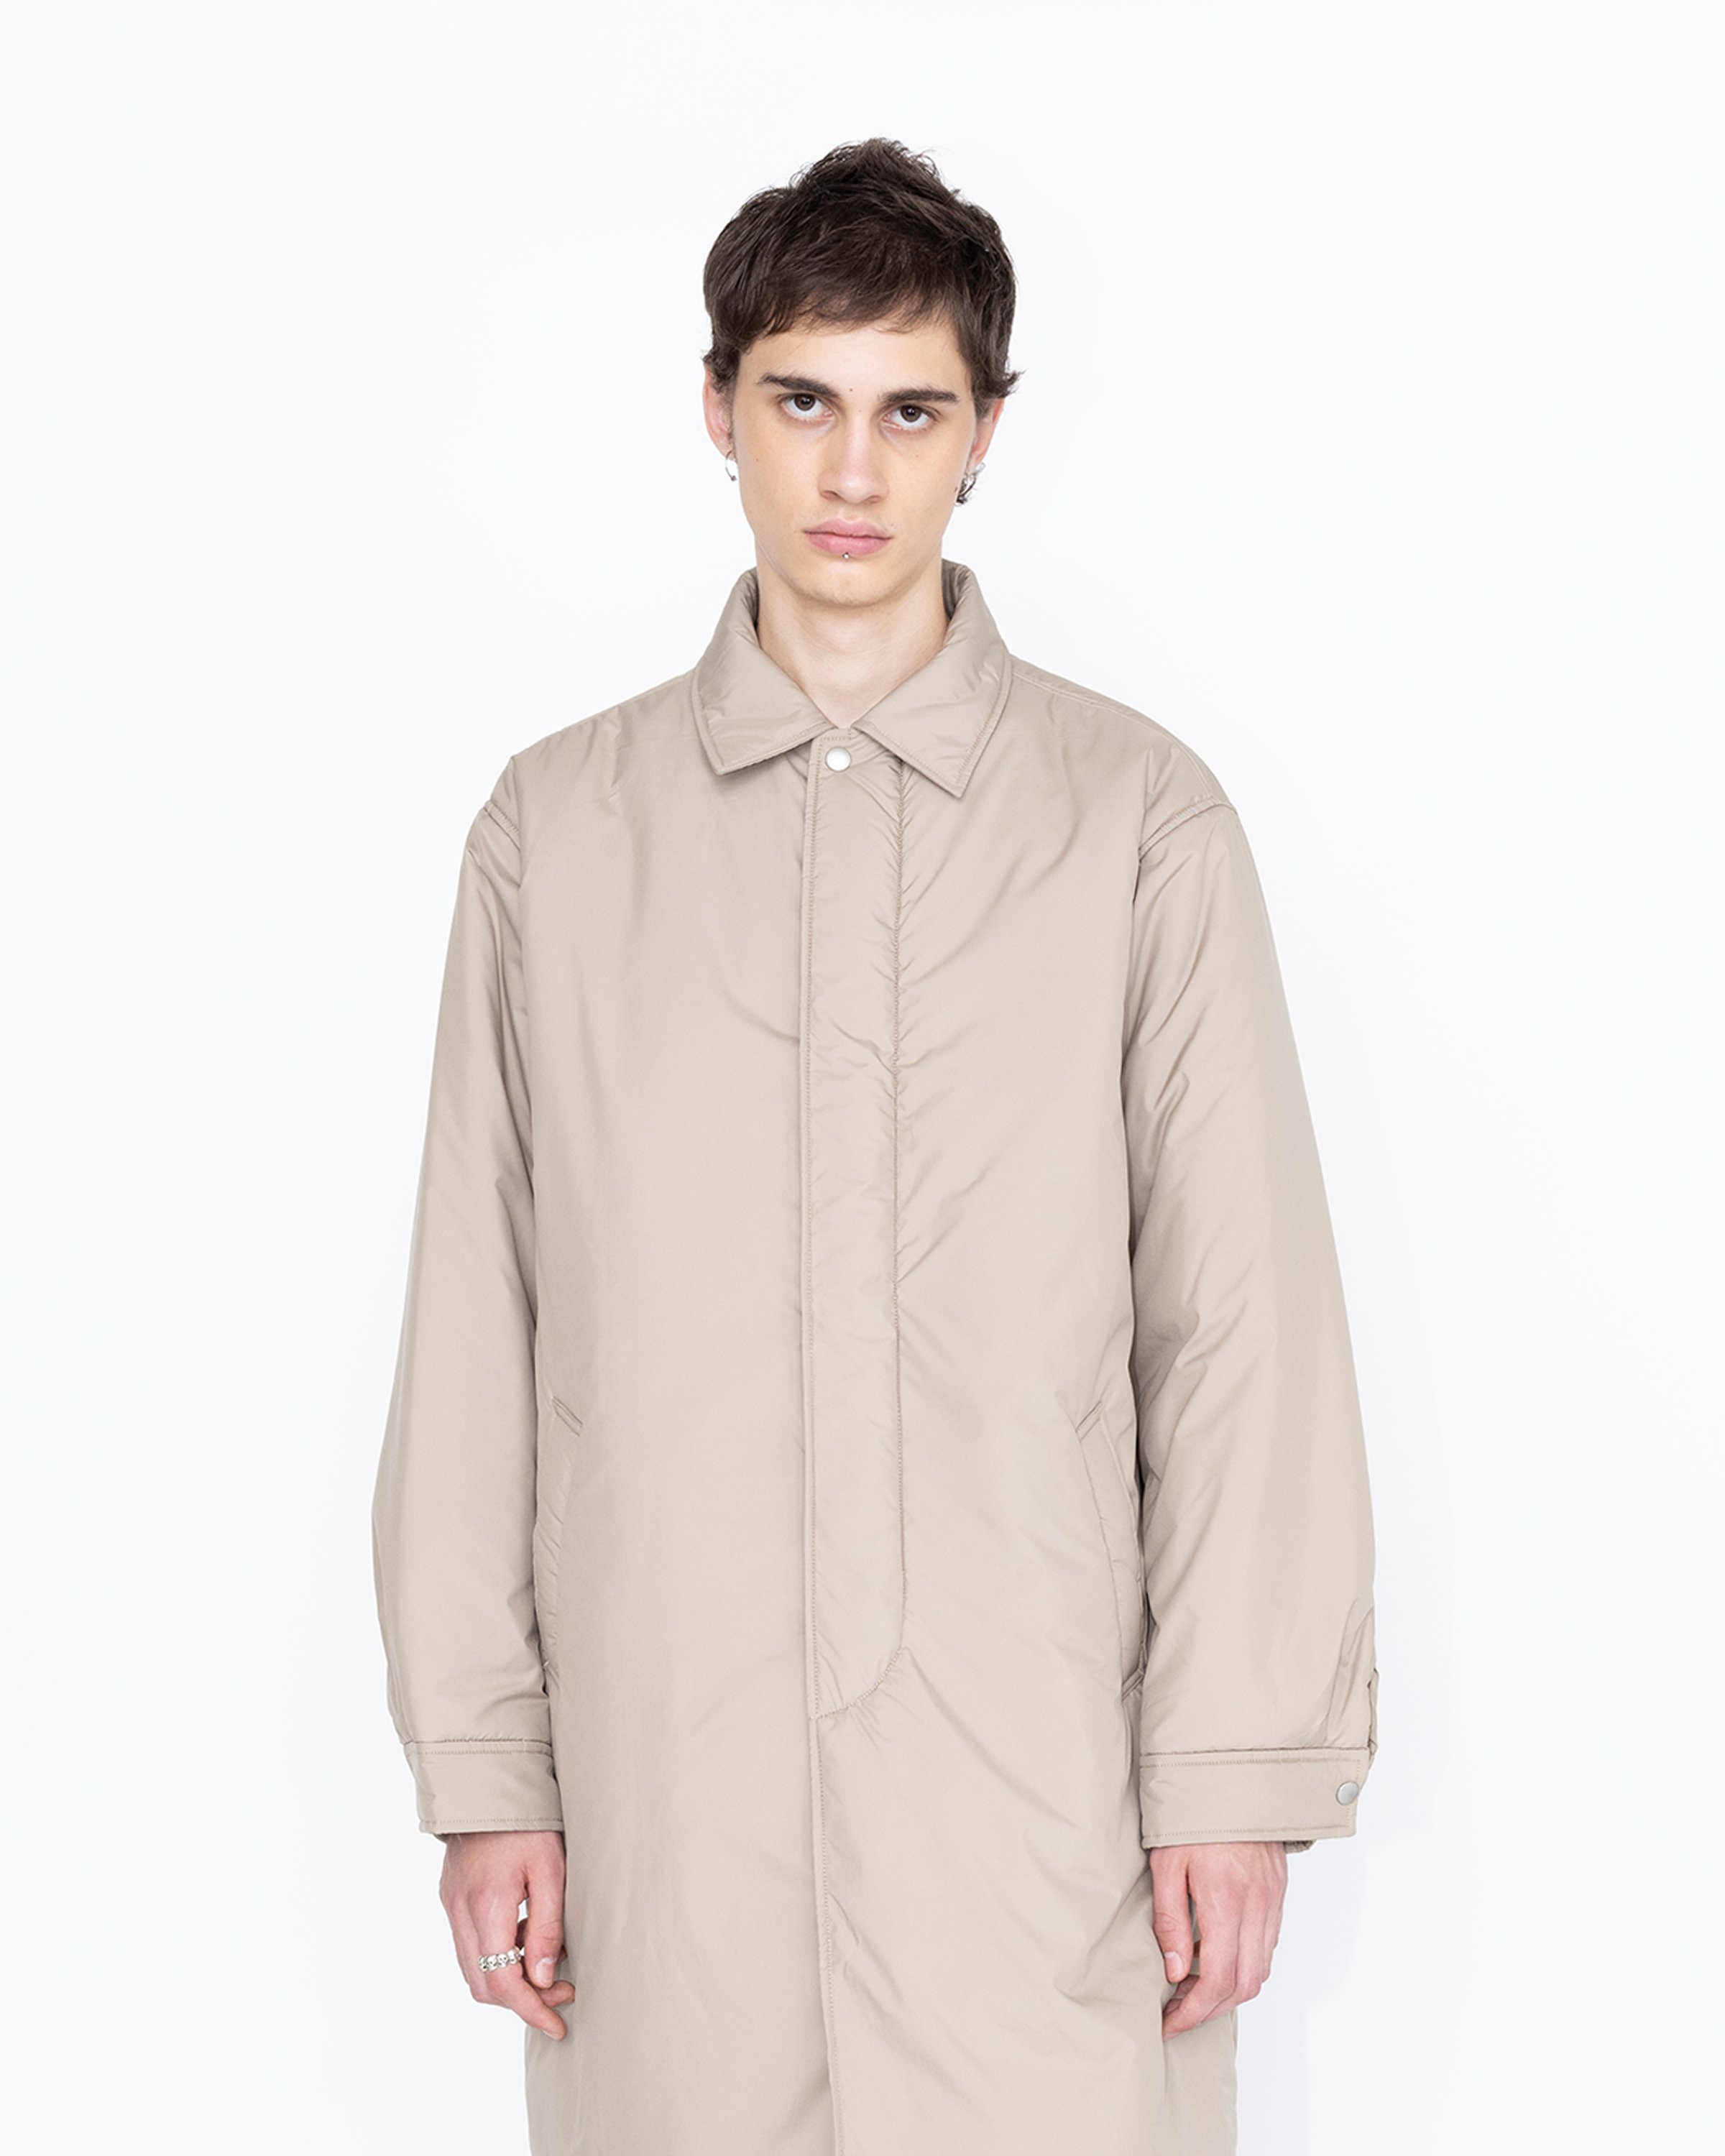 Highsnobiety HS05 - Light Insulated Eco-Poly Trench Coat Beige - Clothing - Beige - Image 3